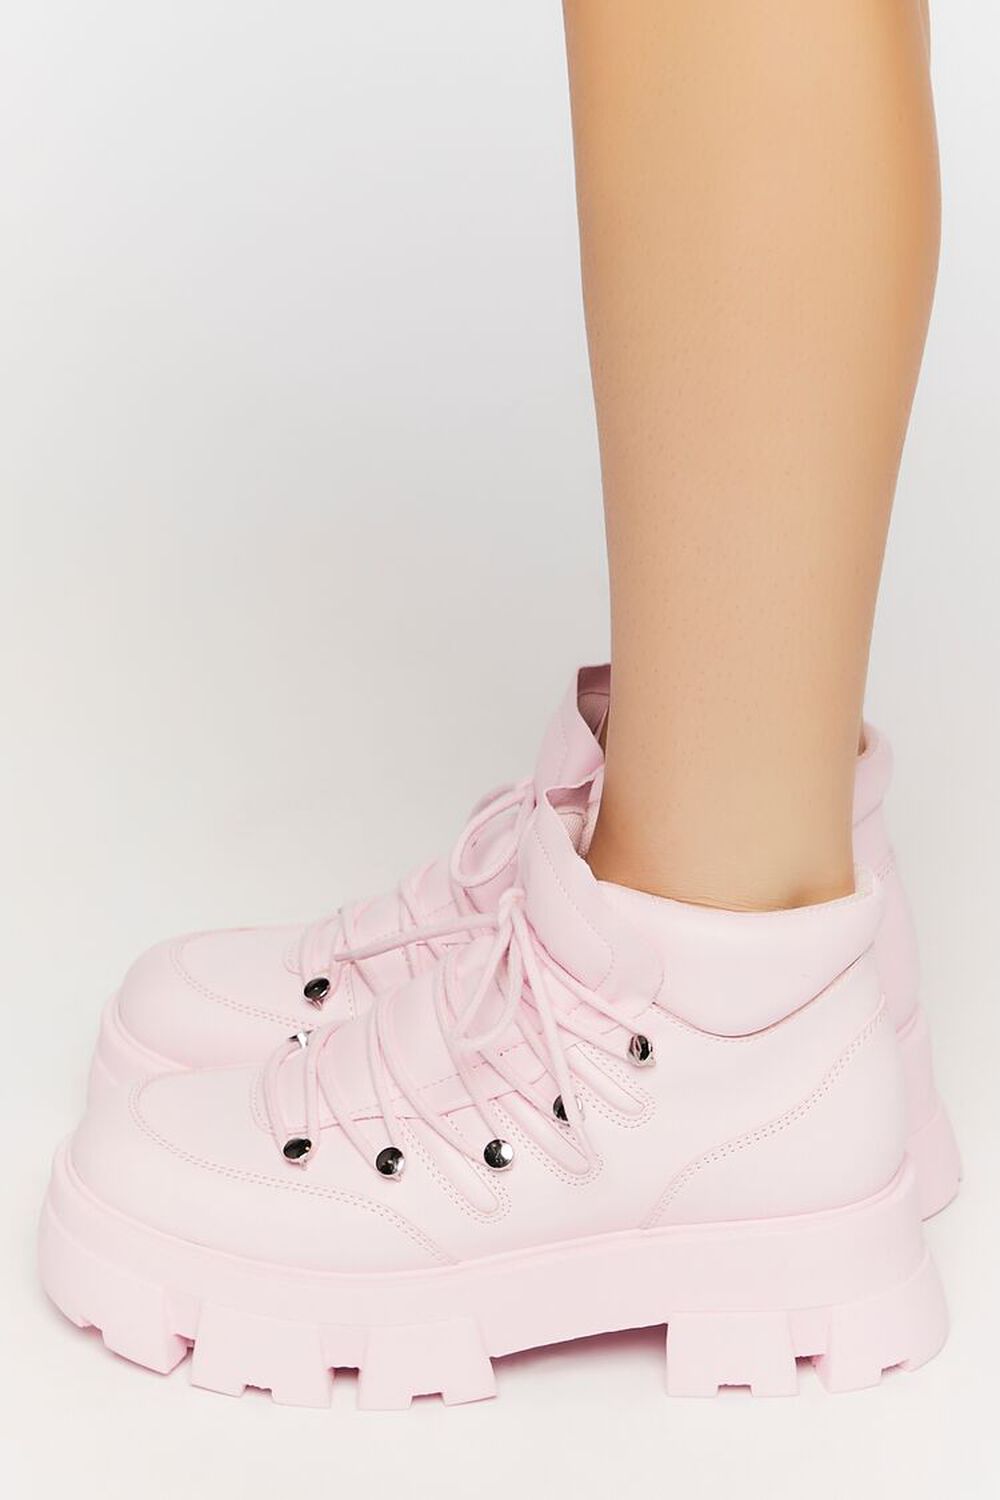 PINK Lace-Up Lug Sole Ankle Booties, image 2